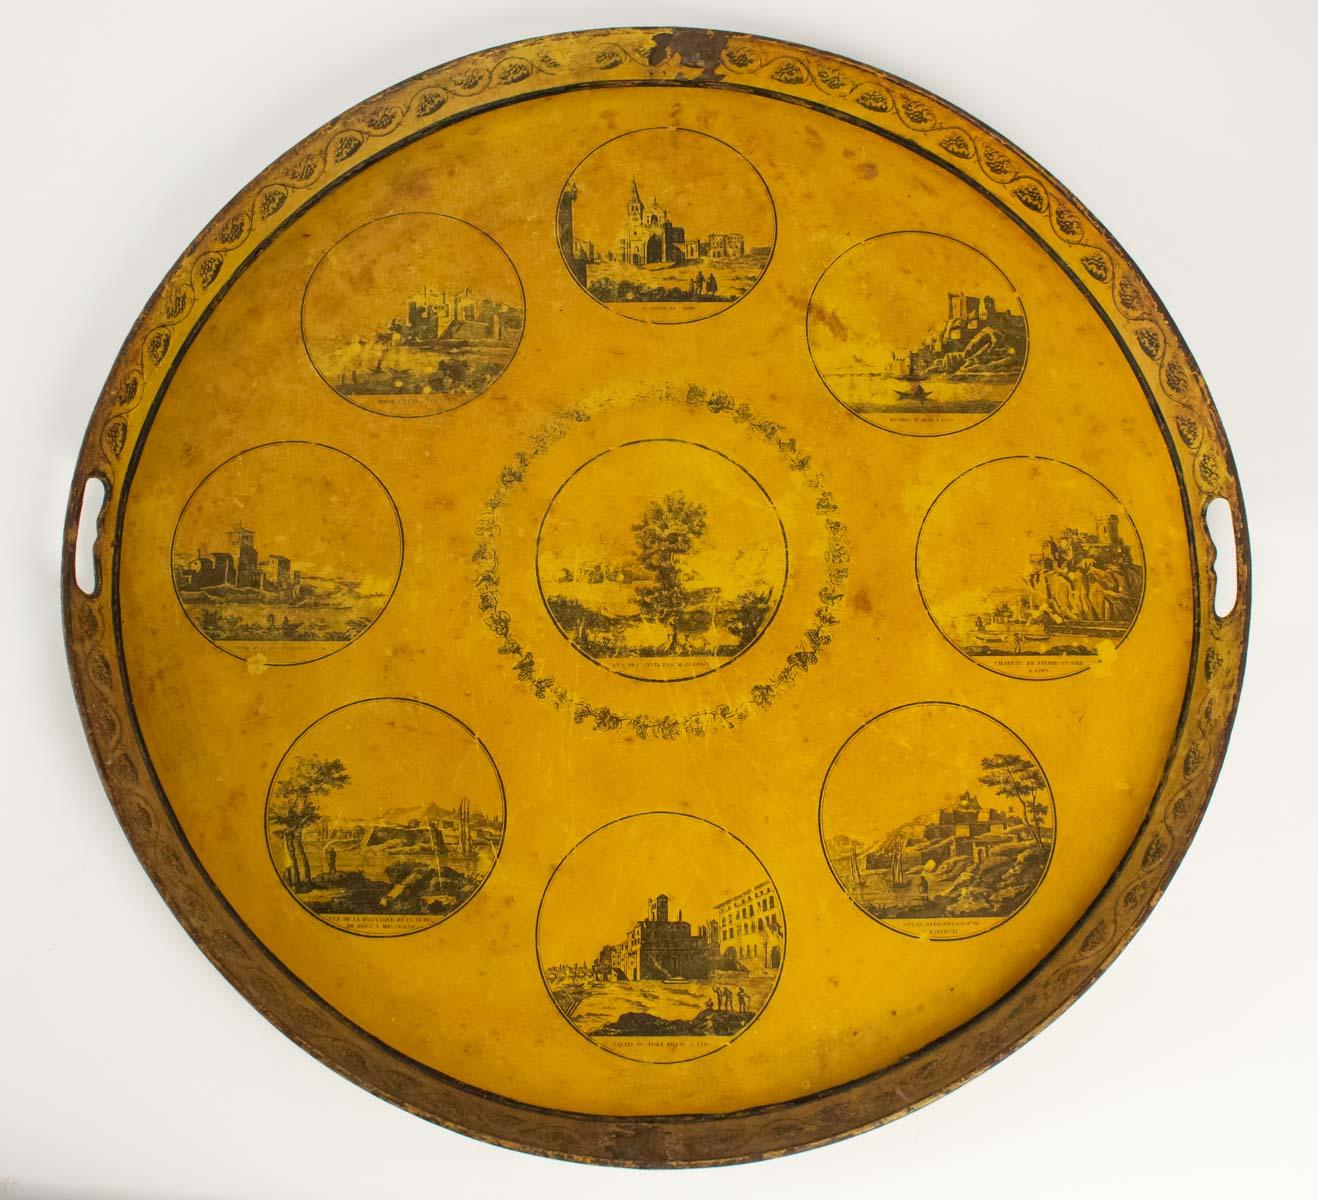 Directoire period sheet metal tray representing monuments from The City of Lyon, 19th century.
Measures: D 65 cm, P 4 cm.